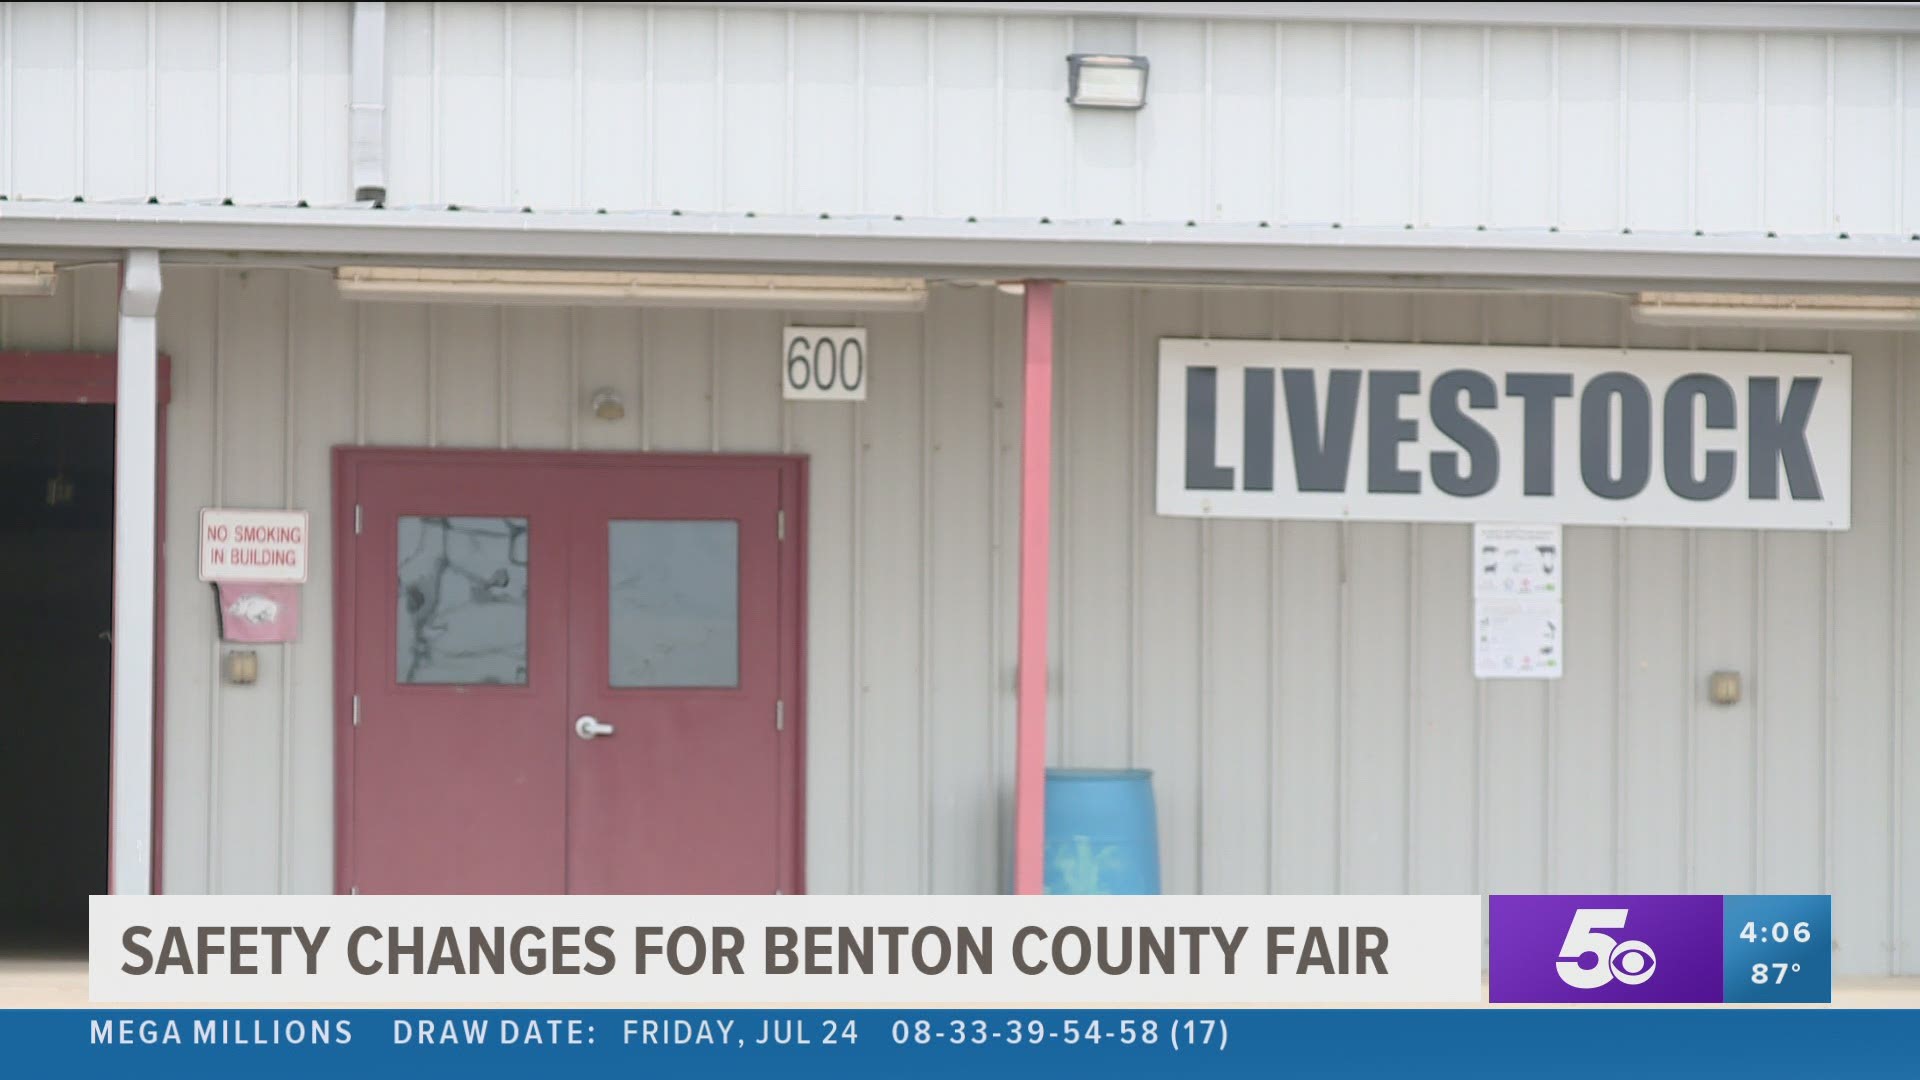 The 116th Annual Benton County Fair has adjusted its schedule to focus on livestock competitions and other exhibitor entries. https://bit.ly/3333iL0